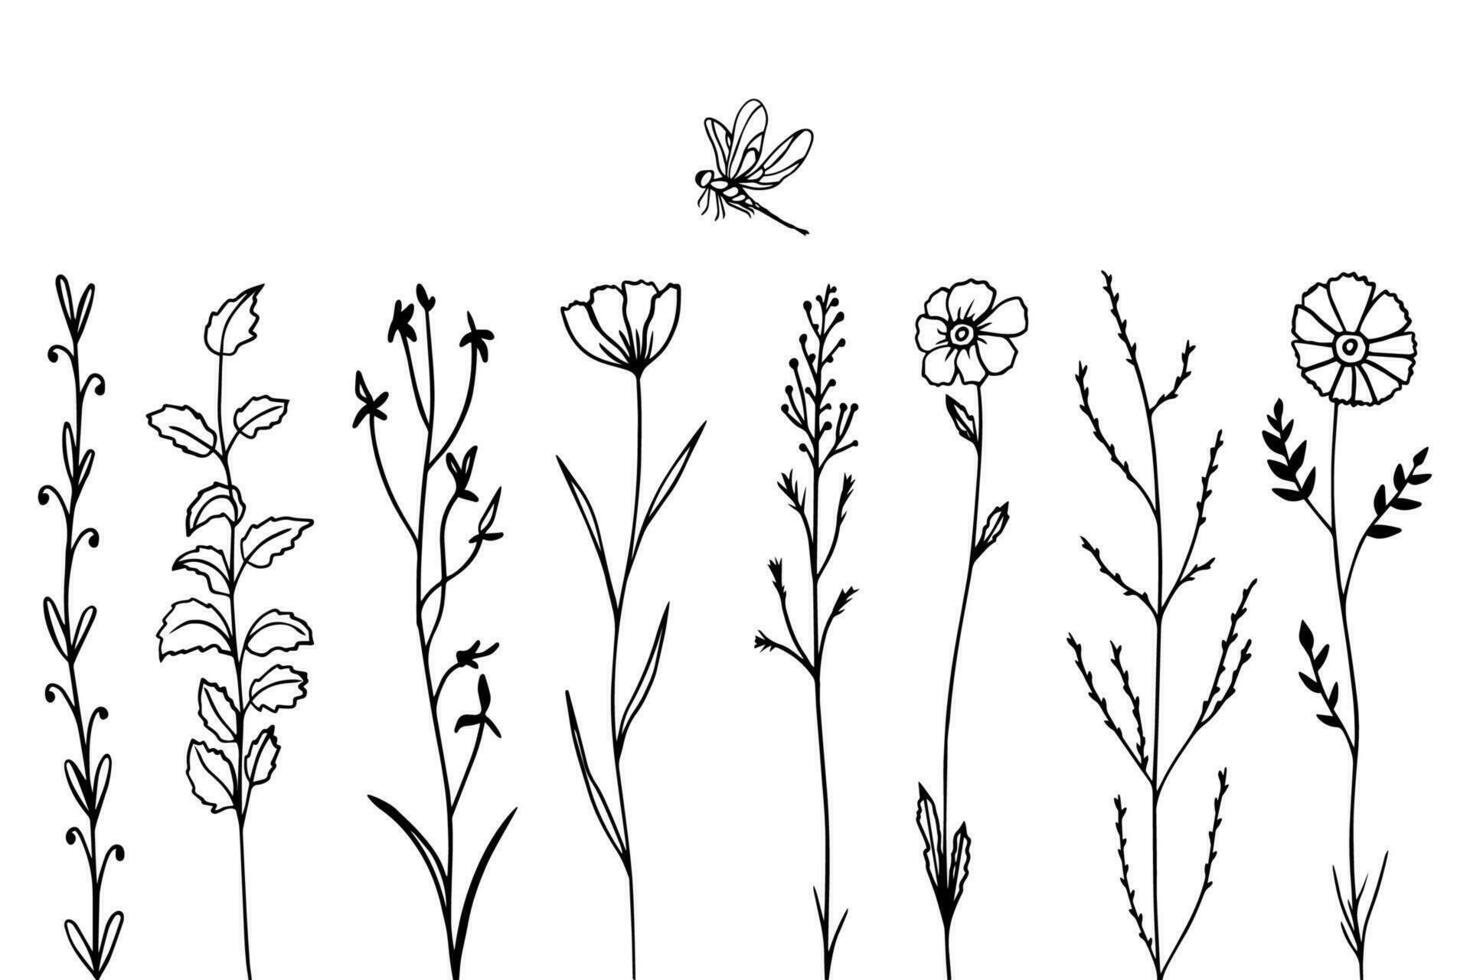 Sketch black flowers and herb with dragonfly, doodle style vector